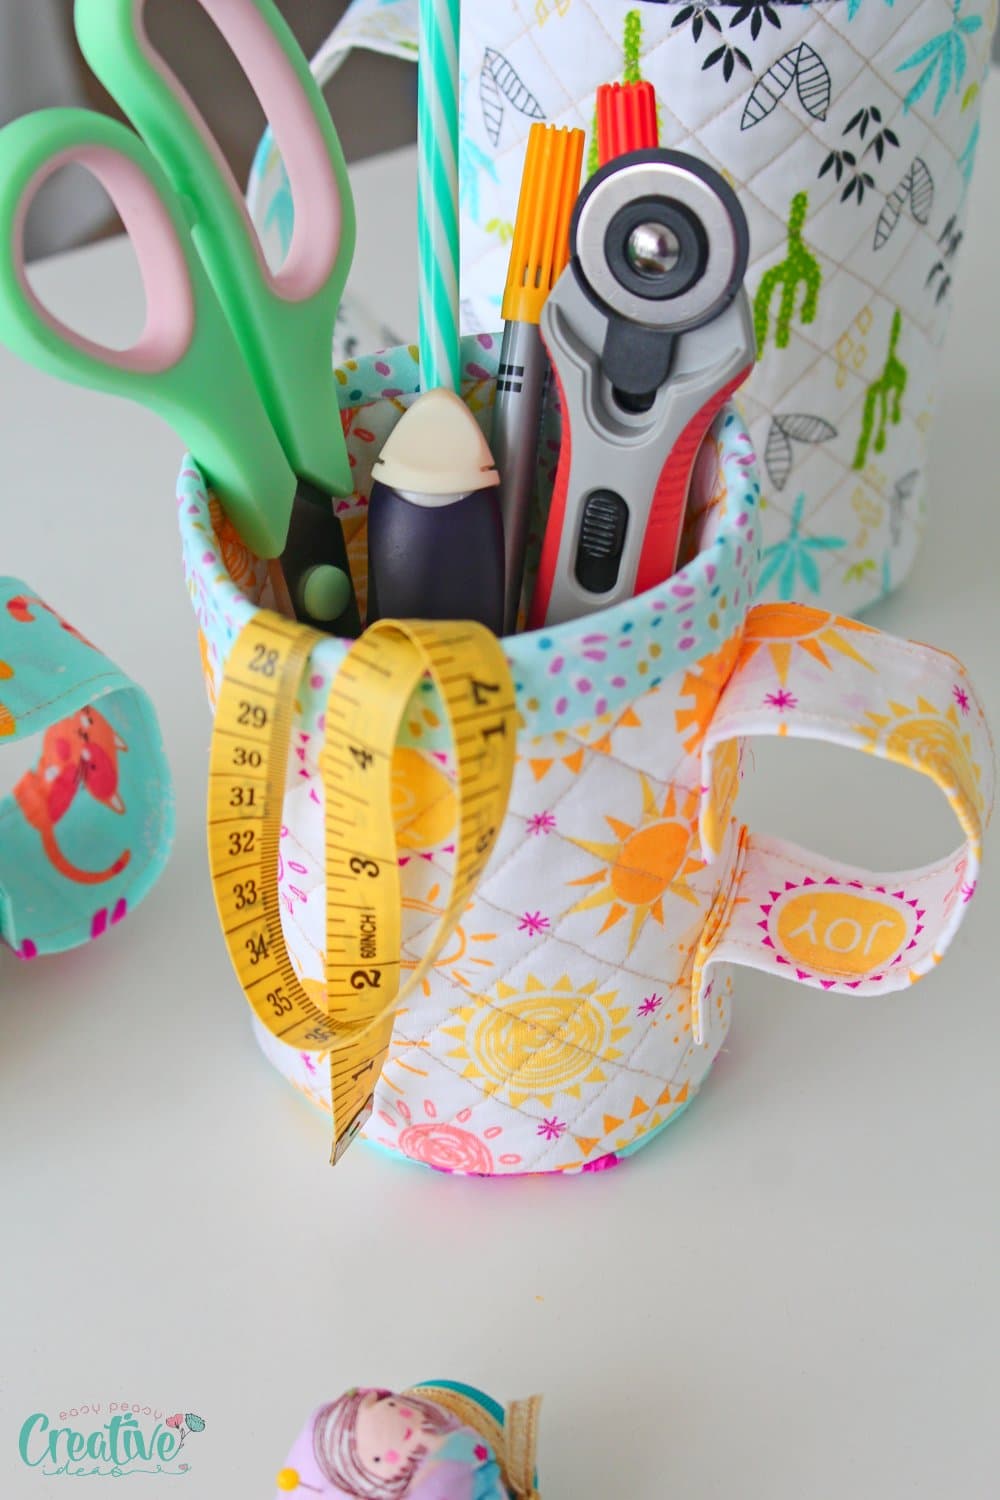 Quilted mugs